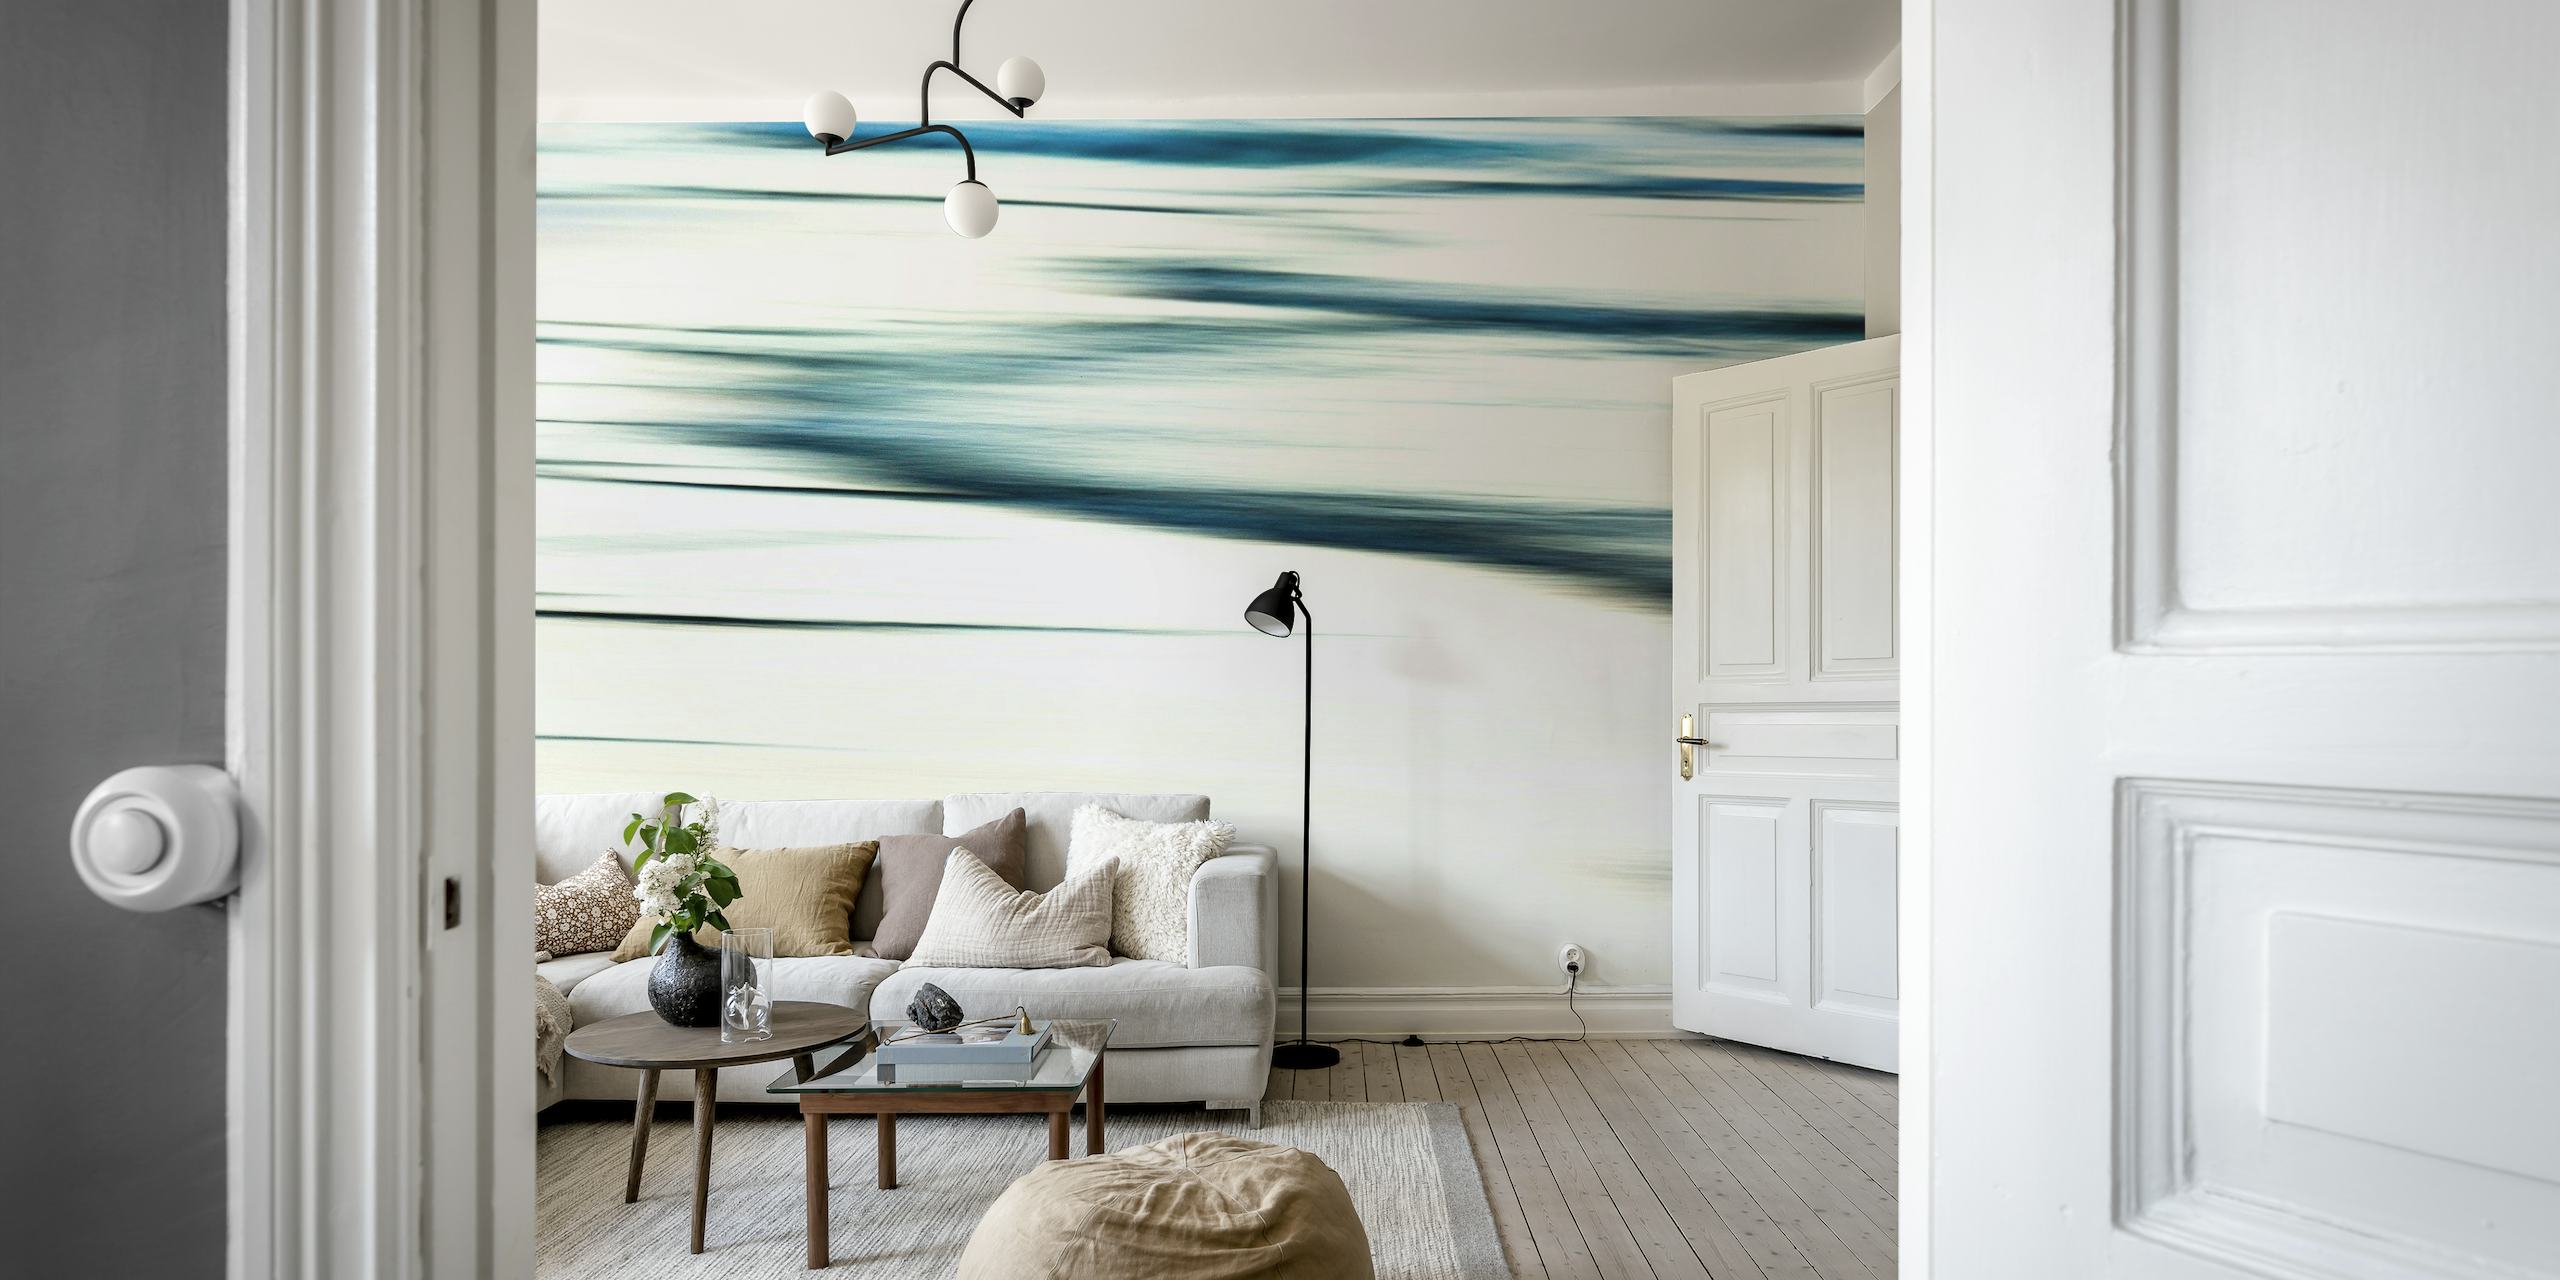 Abstract ocean waves wall mural with a mix of white and blue swirls representing 'My Bleeding Heart Soul of the Ocean'